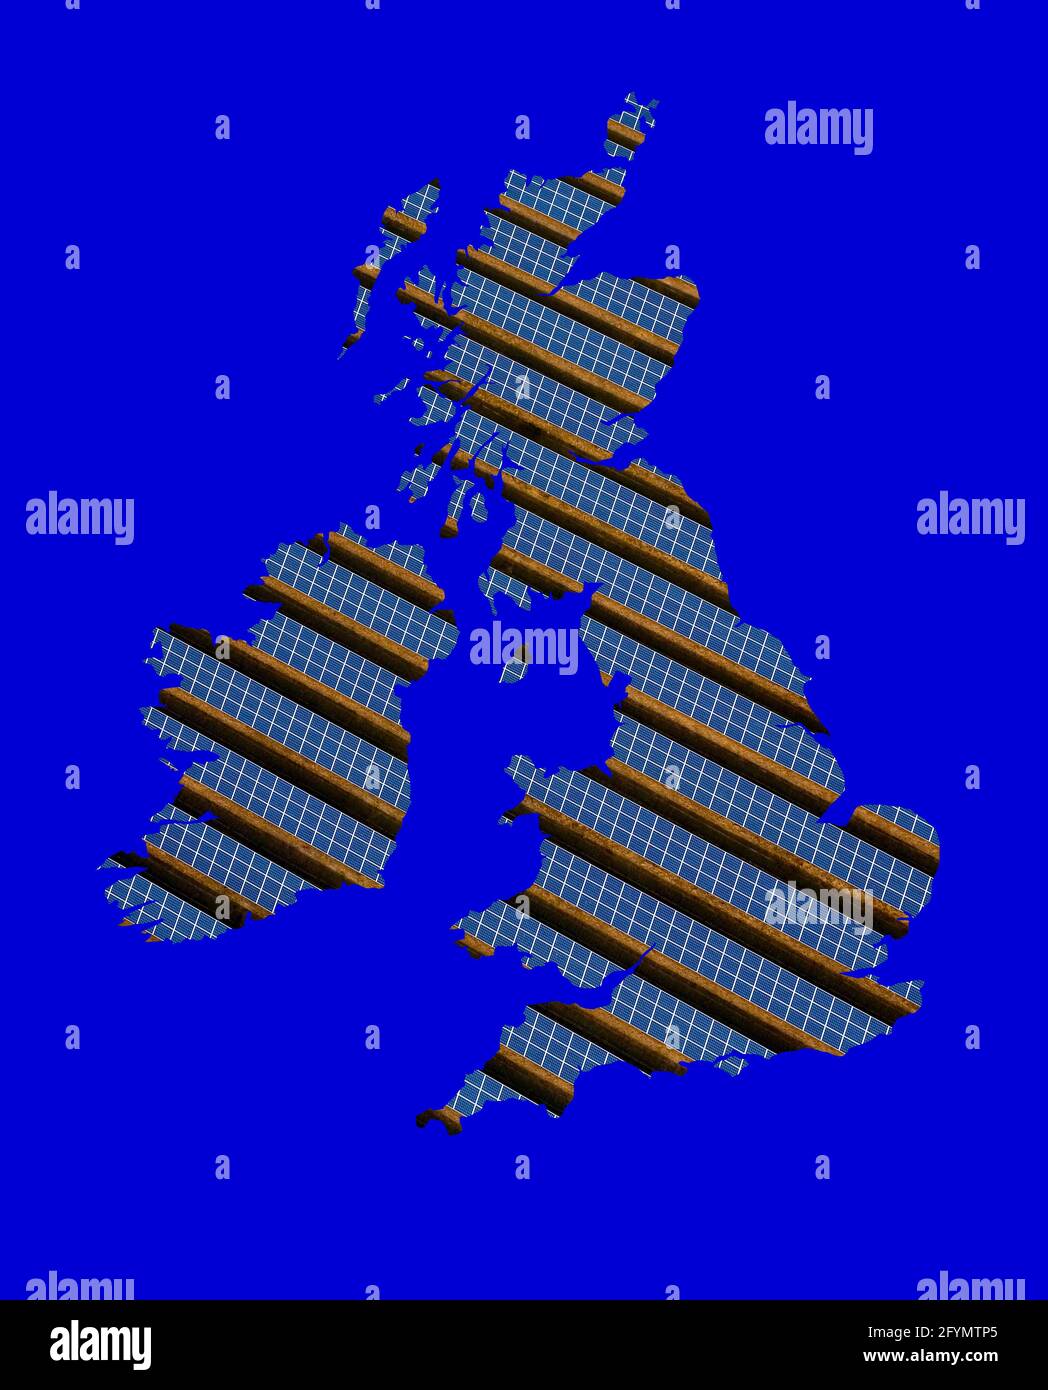 Rows of solar panels inside map of the UK, composite image Stock Photo